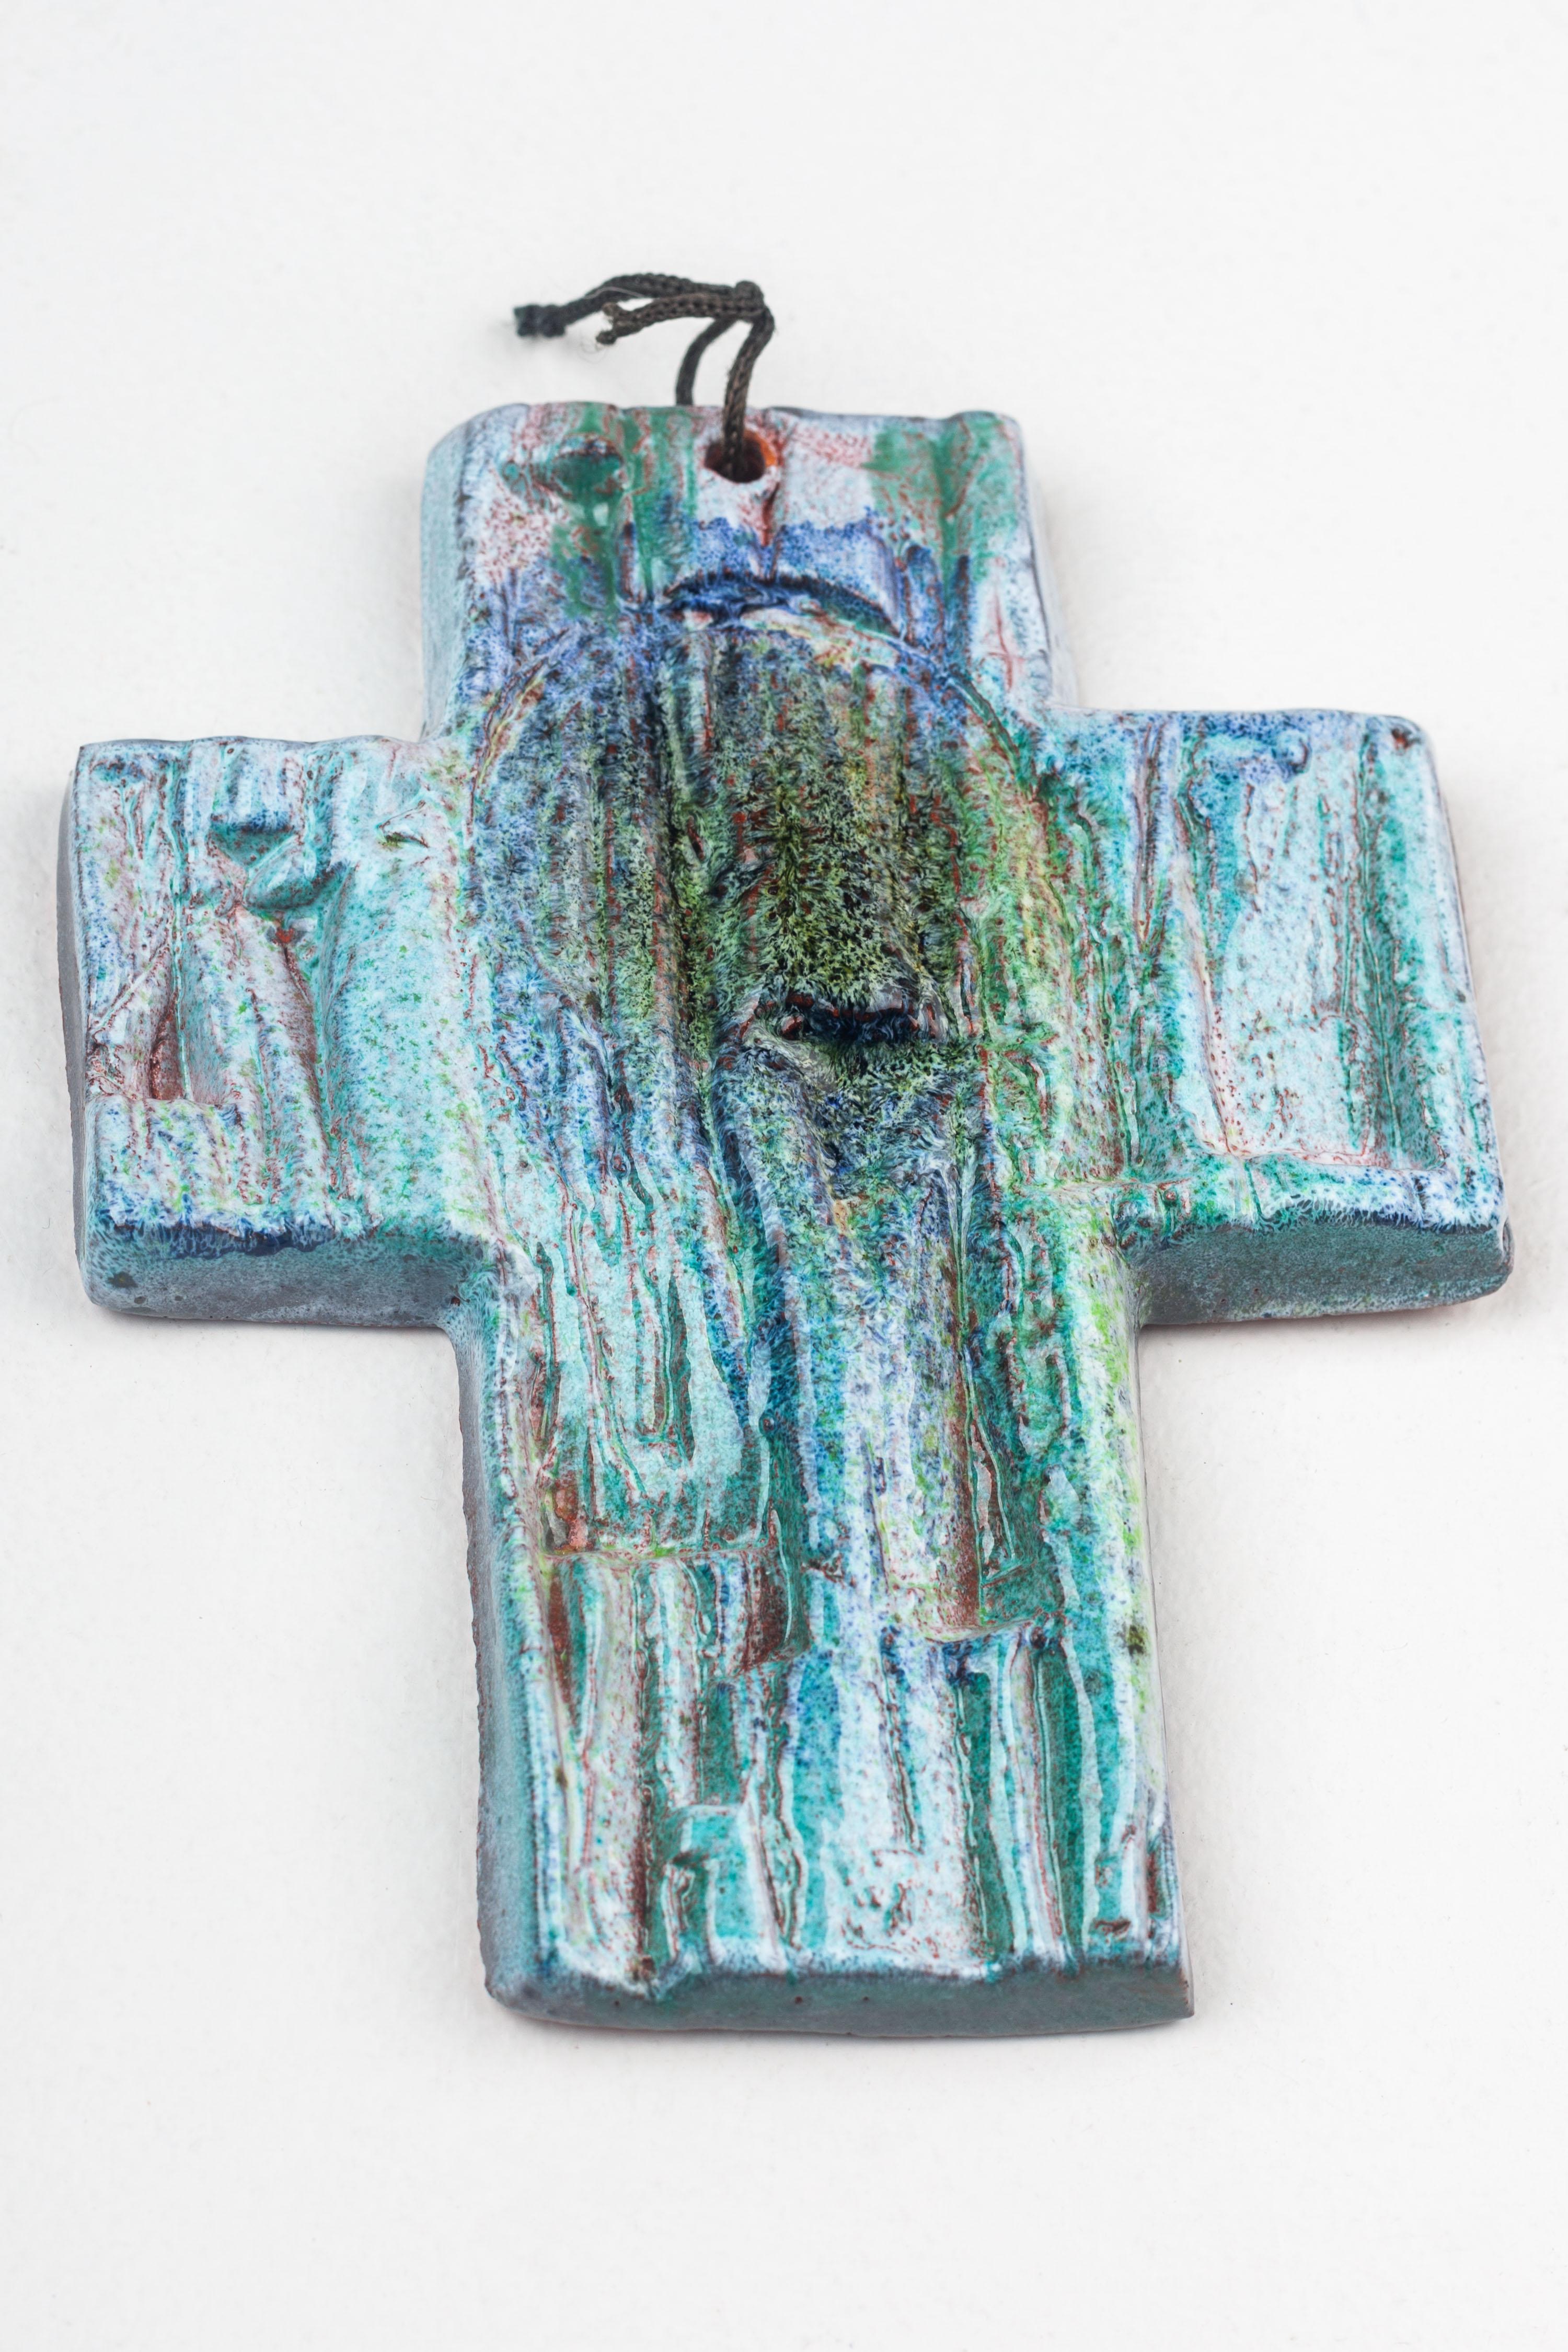 European Abstract Mid-Century Ceramic Cross For Sale